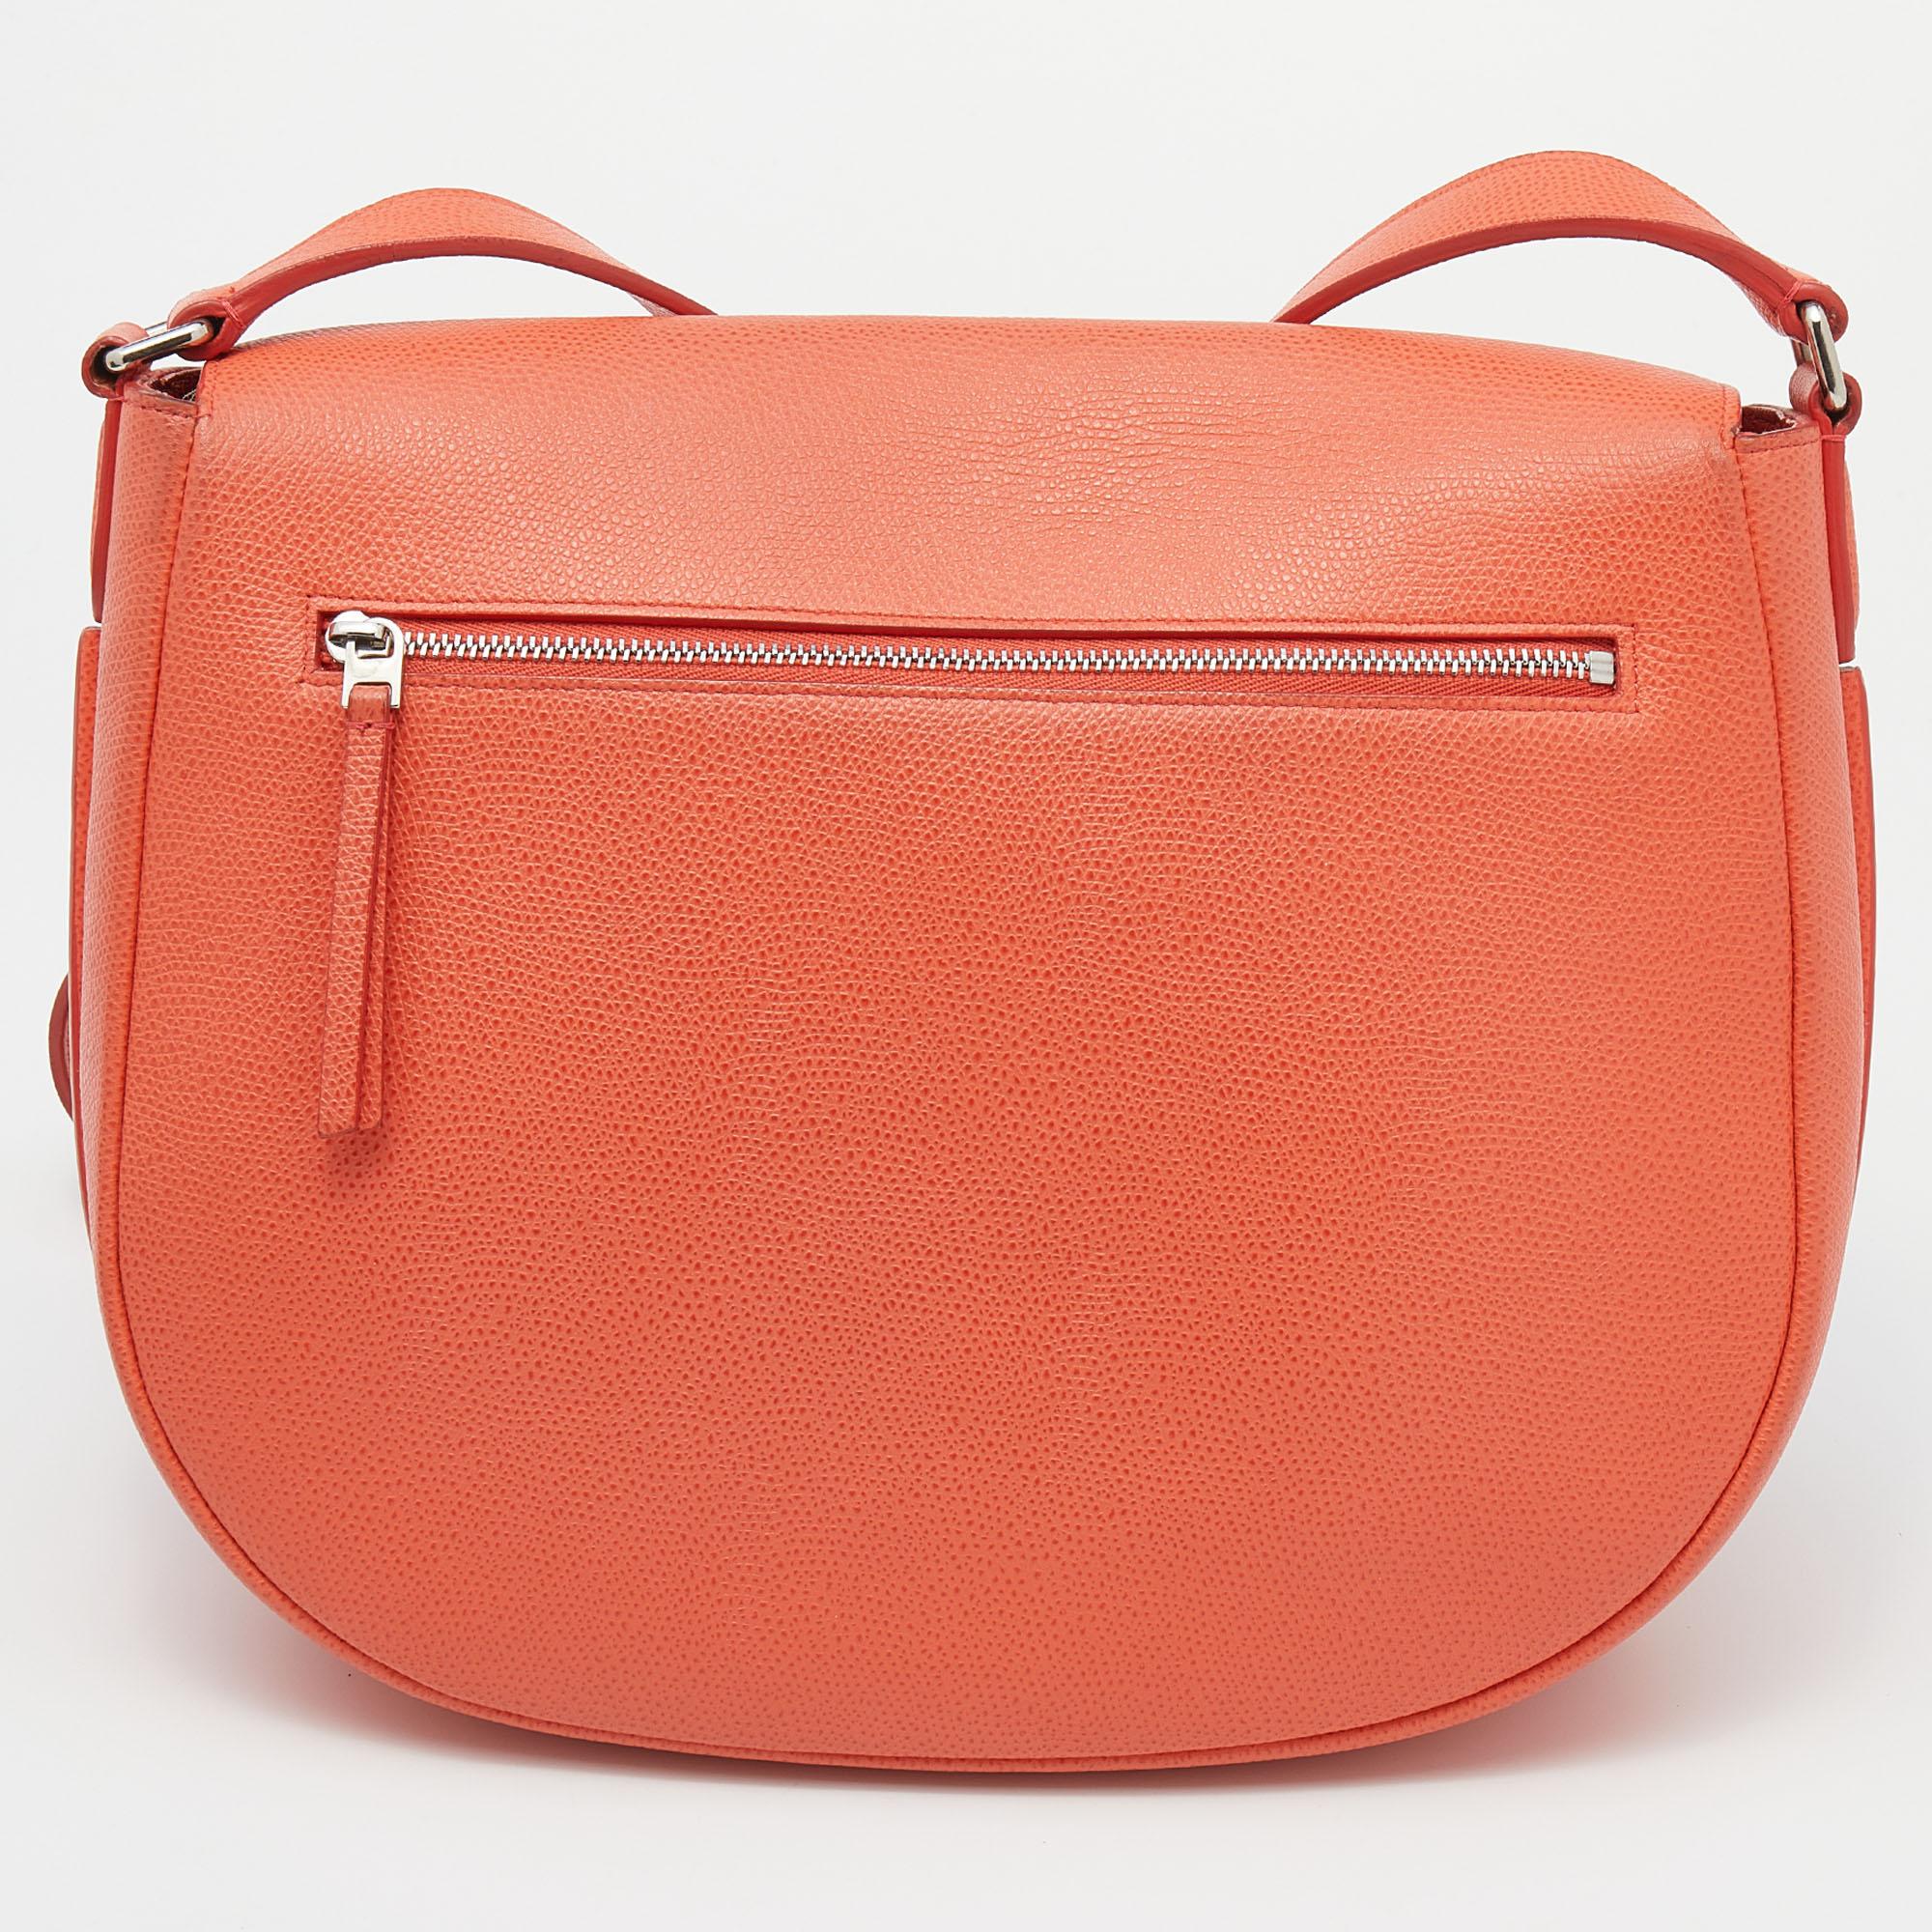 How gorgeous and adorable is this Trotteur messenger bag from Celine! It is made from orange leather on the exterior. Its sturdy shape is supported by a shoulder strap. It has a well-sized leather interior. This bright bag will definitely be your